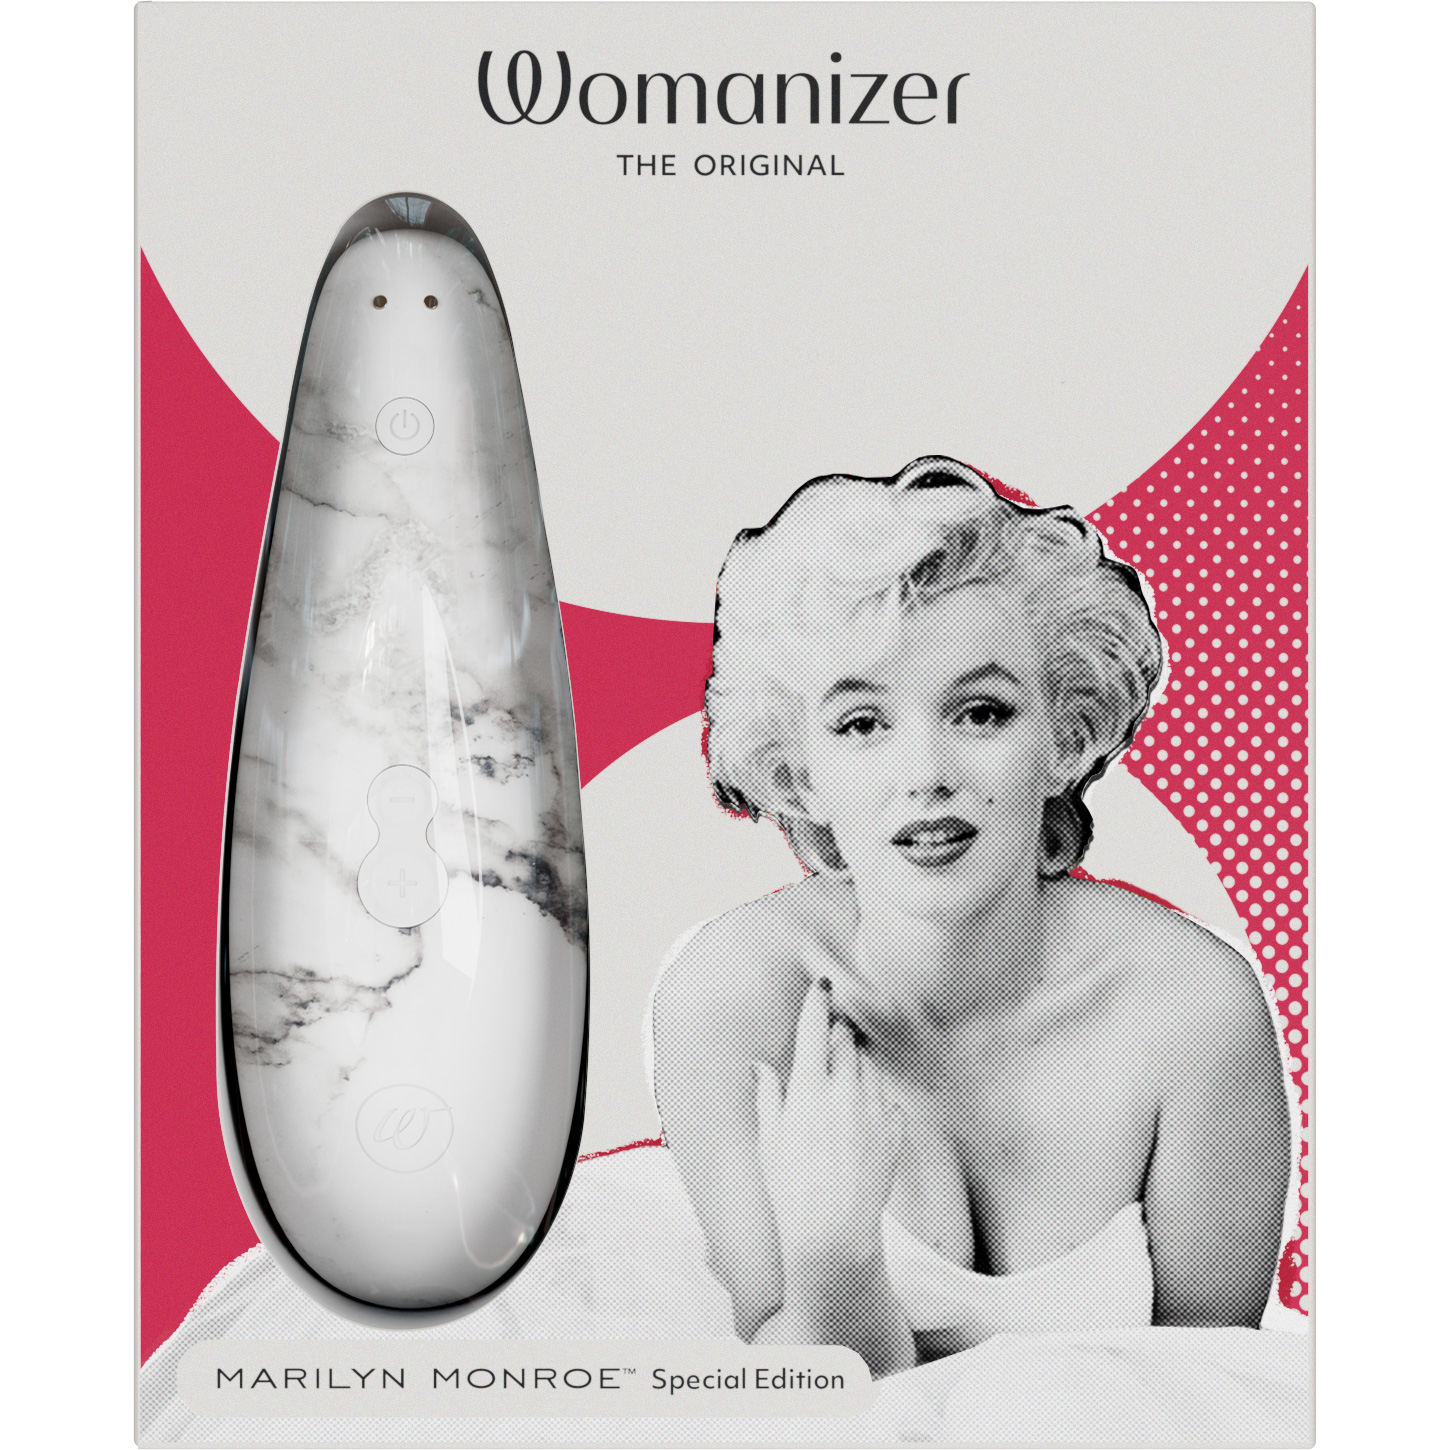 Womanizer Marilyn Monroe Special Edition - The Box